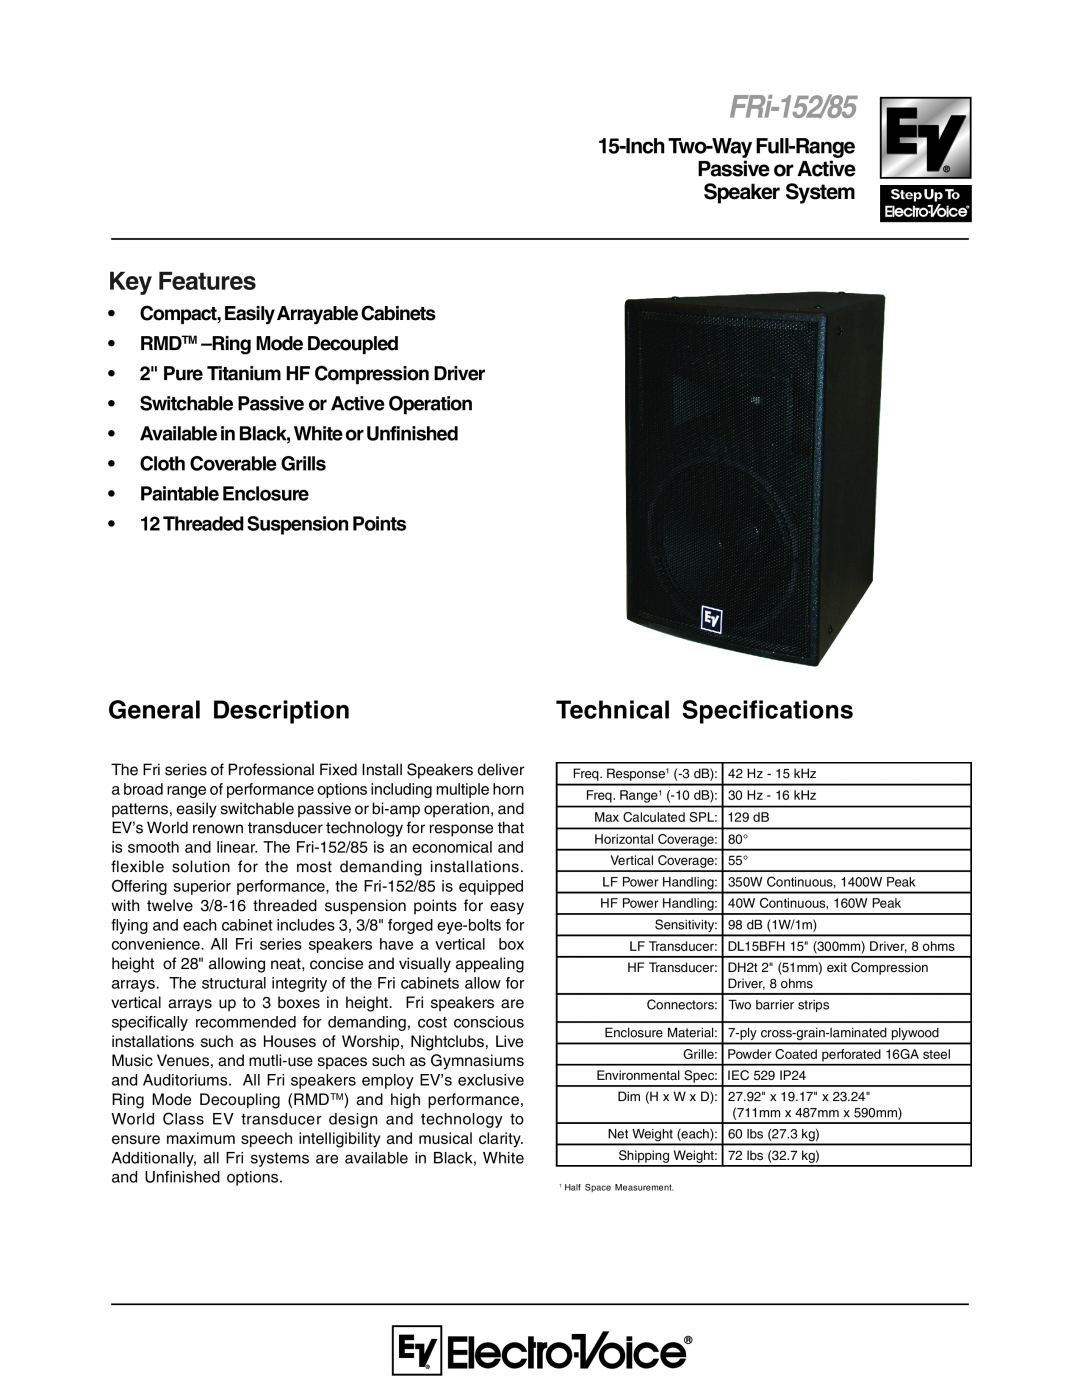 Electro-Voice FRi-152/85 technical specifications General Description, Key Features, Technical Specifications 